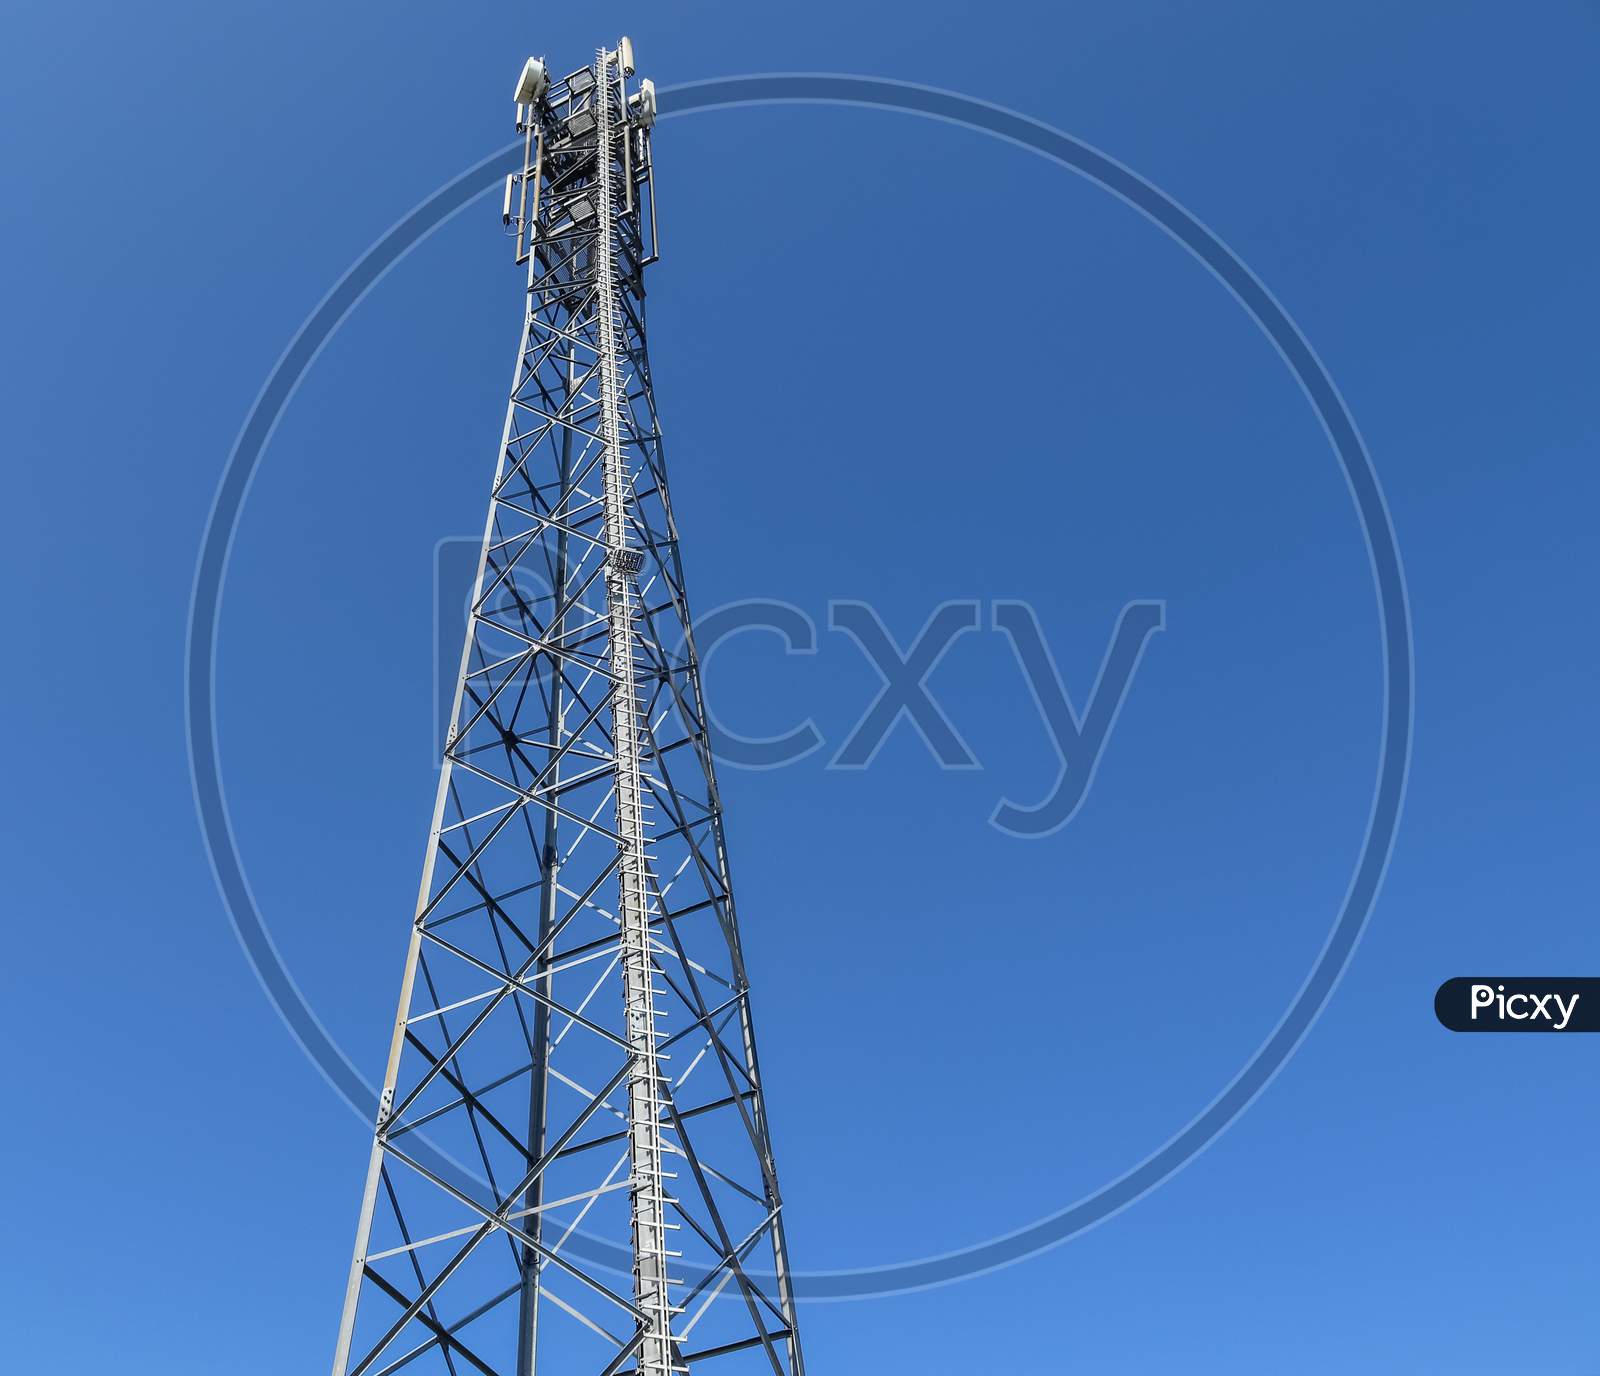 Electric Antenna And Communication Transmitter Tower In A Northern European Landscape Against A Blue Sky